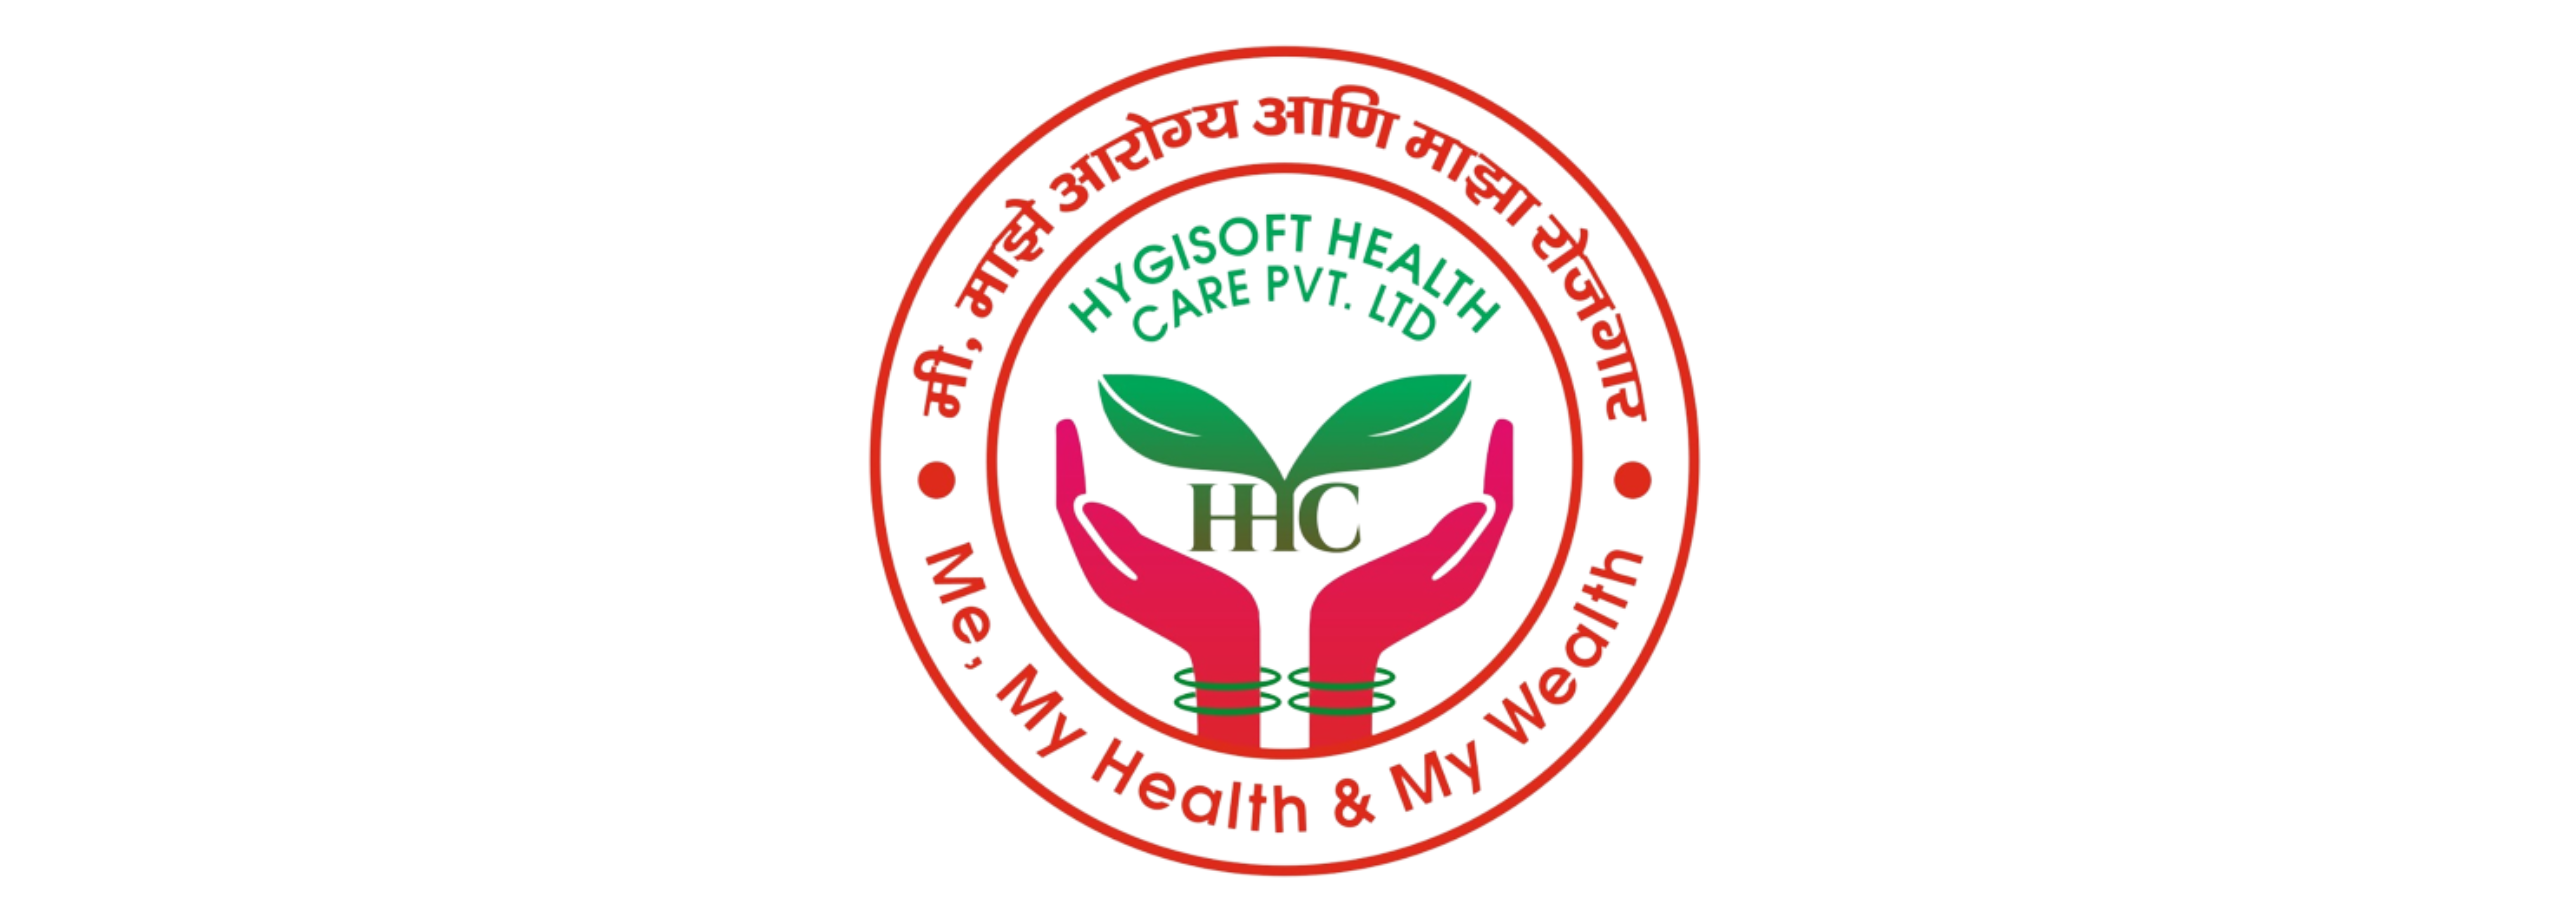 Hygisoft Healthcare Private Limited